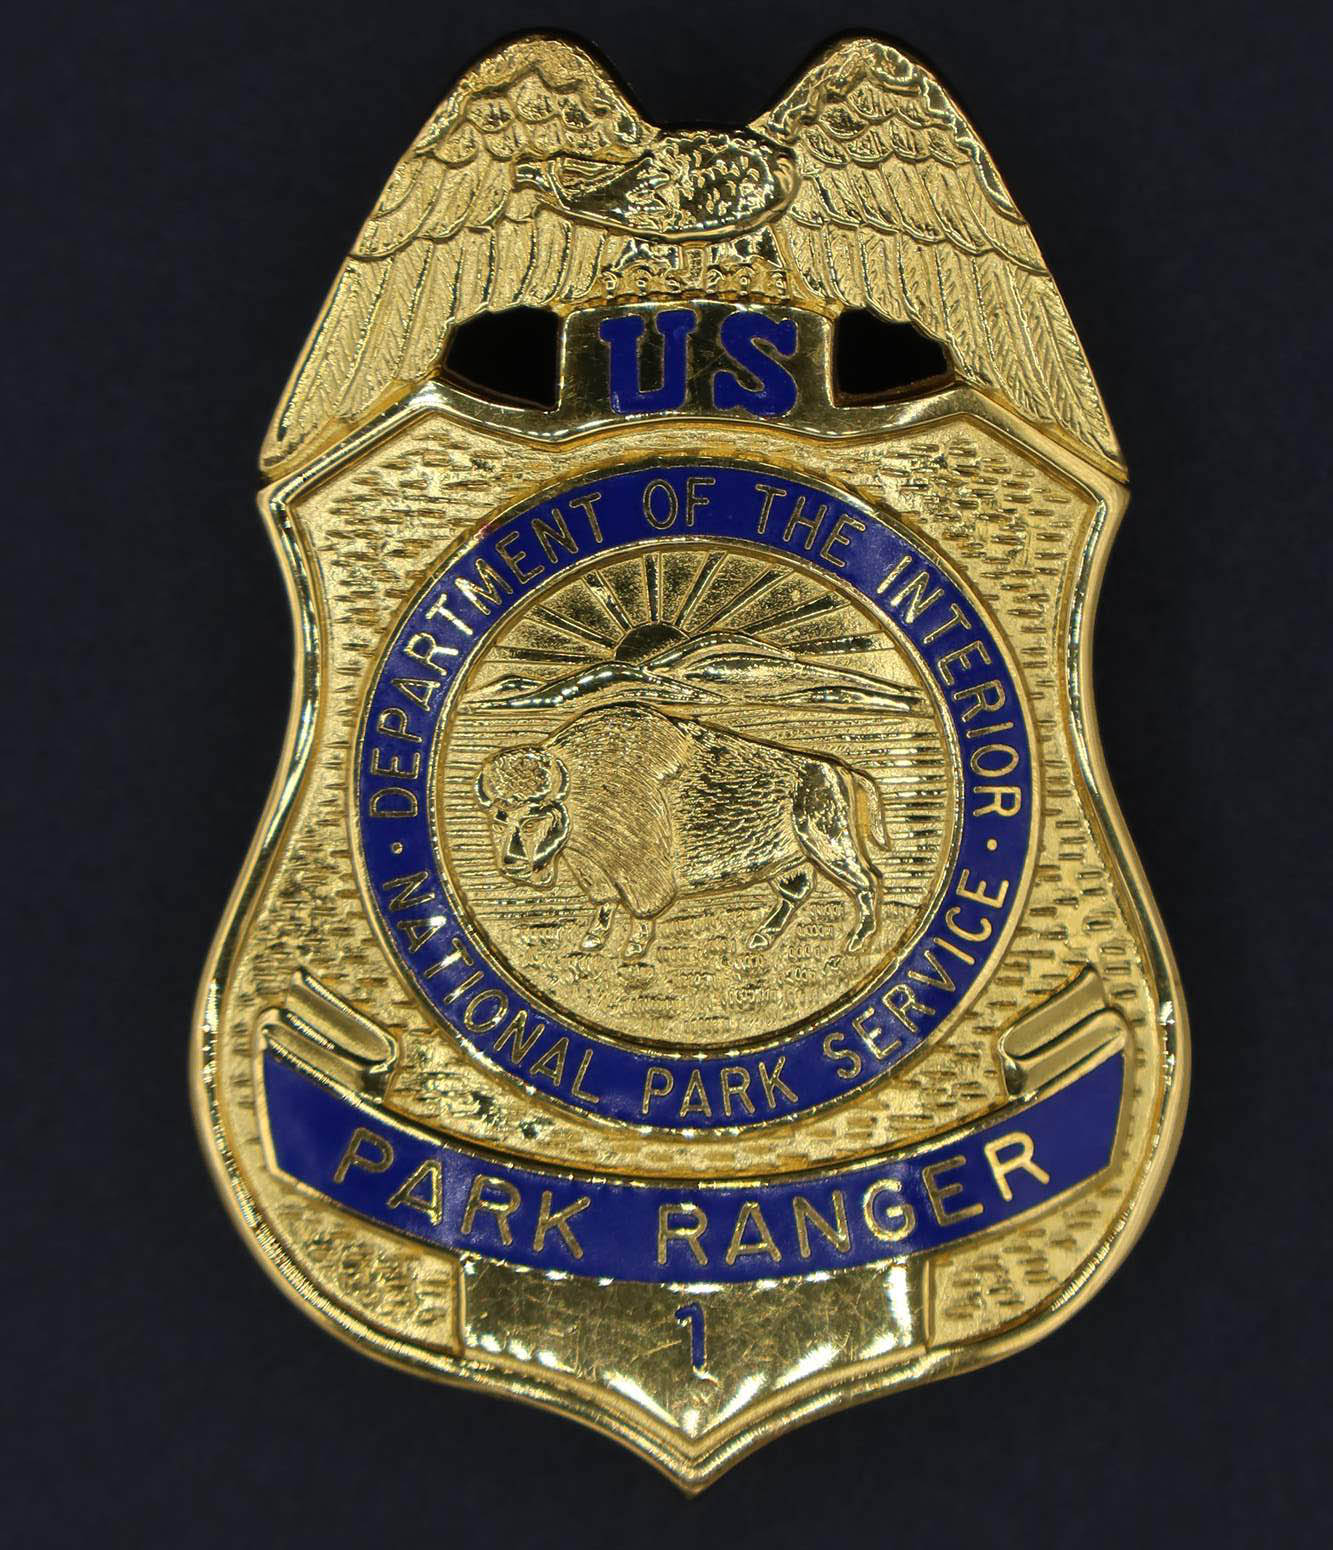 Gold shield-shaped badge with eagle on top. Marked U.S. Park Ranger and 1 in blue. Round seal has blue border with bison in the middle.